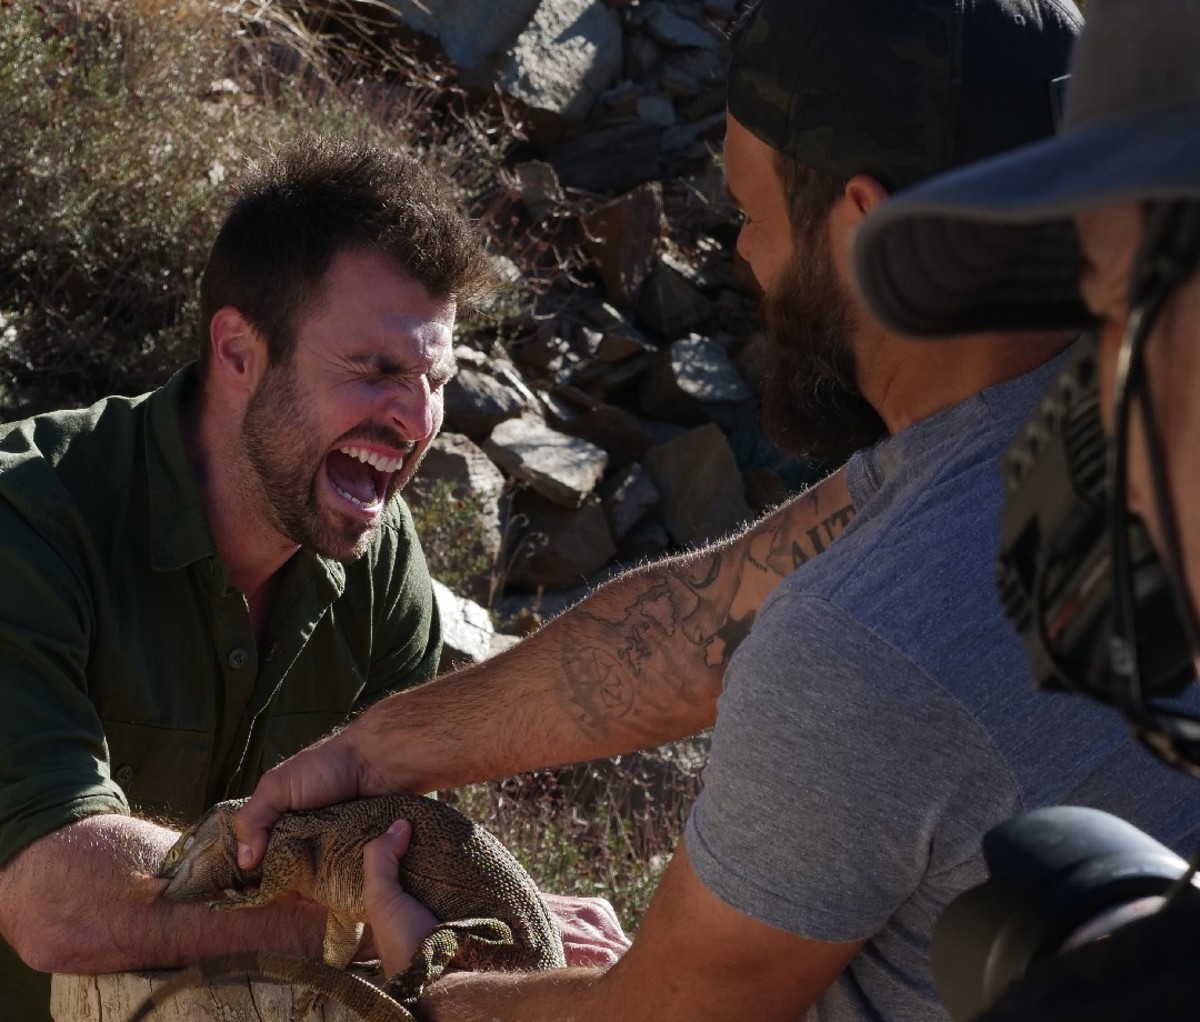 'Kings of Pain' co-host Adam Thorn screaming while Adam Thorn holds a lizard biting his arm.